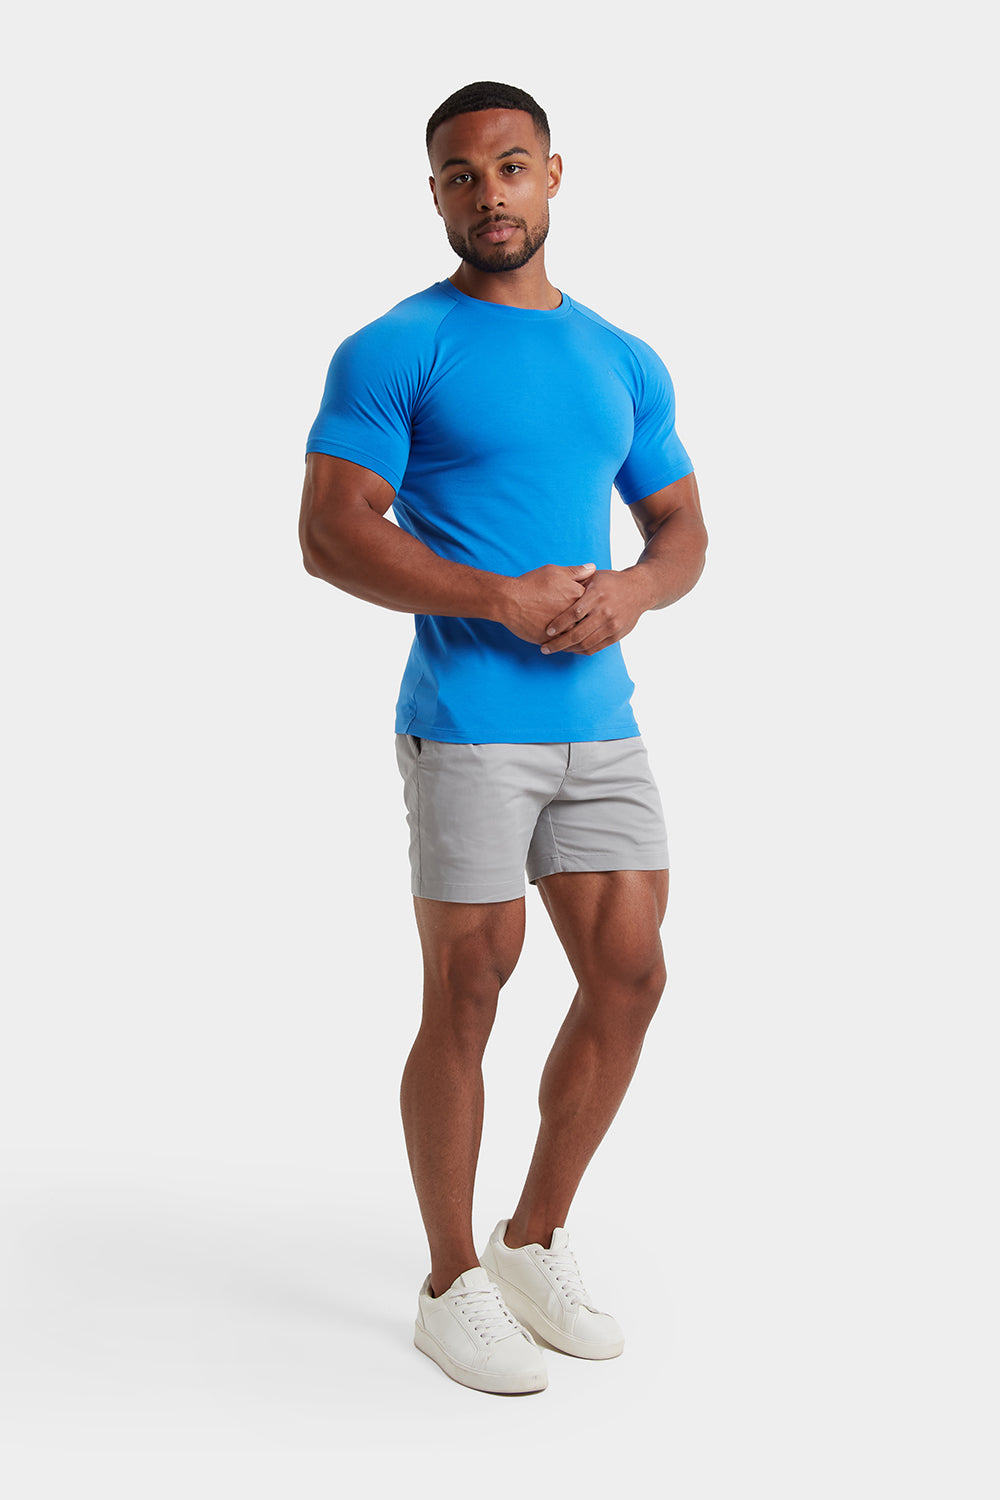 Premium Muscle Fit T-Shirt in Azure Blue - TAILORED ATHLETE - ROW